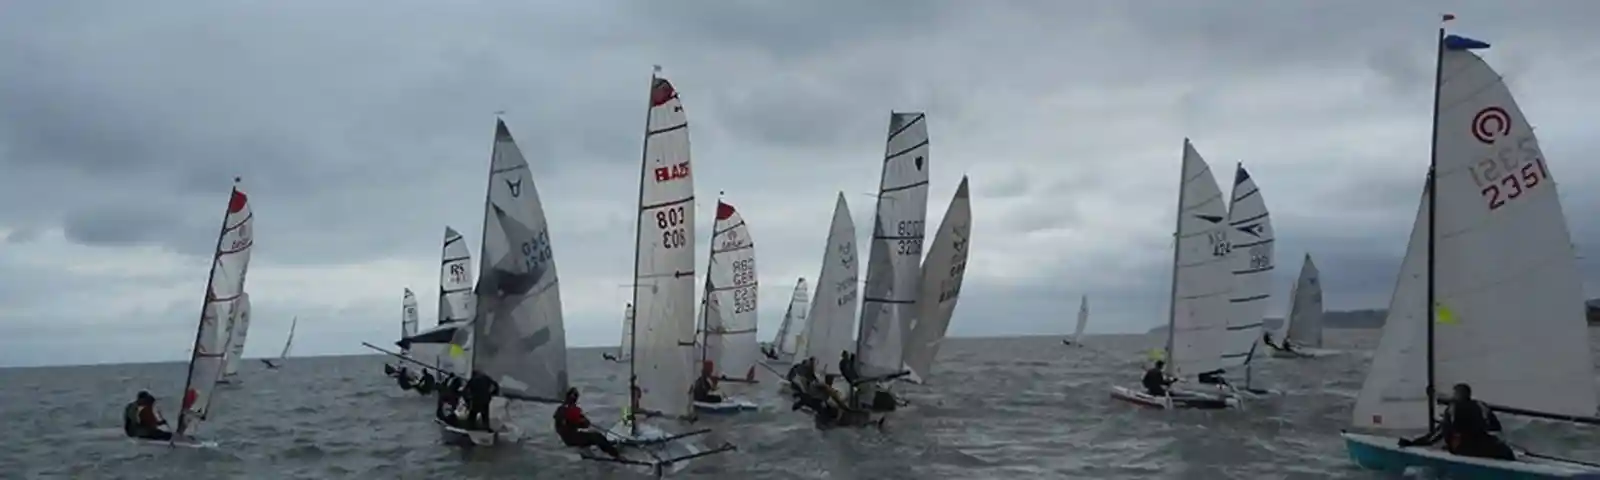 Round the Isle of Sheppey Race Picture.jpg